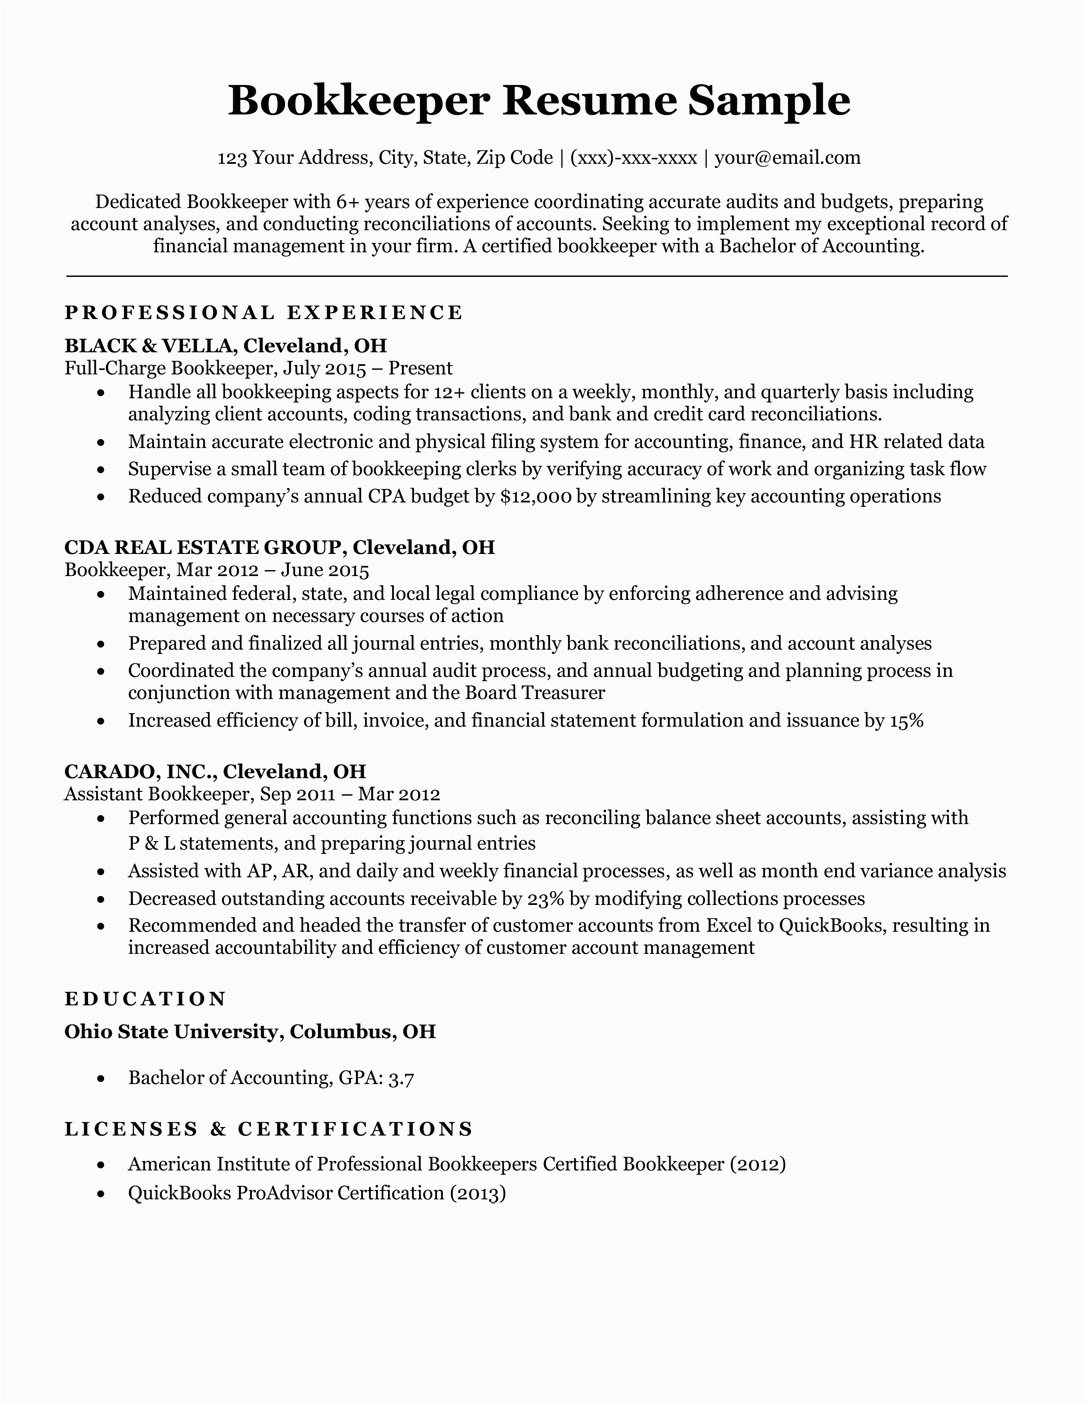 Entry Level Accounting Bookkeeping Resume Sample Download Entry Level Bookkeeper Resume Sample Png Rnx